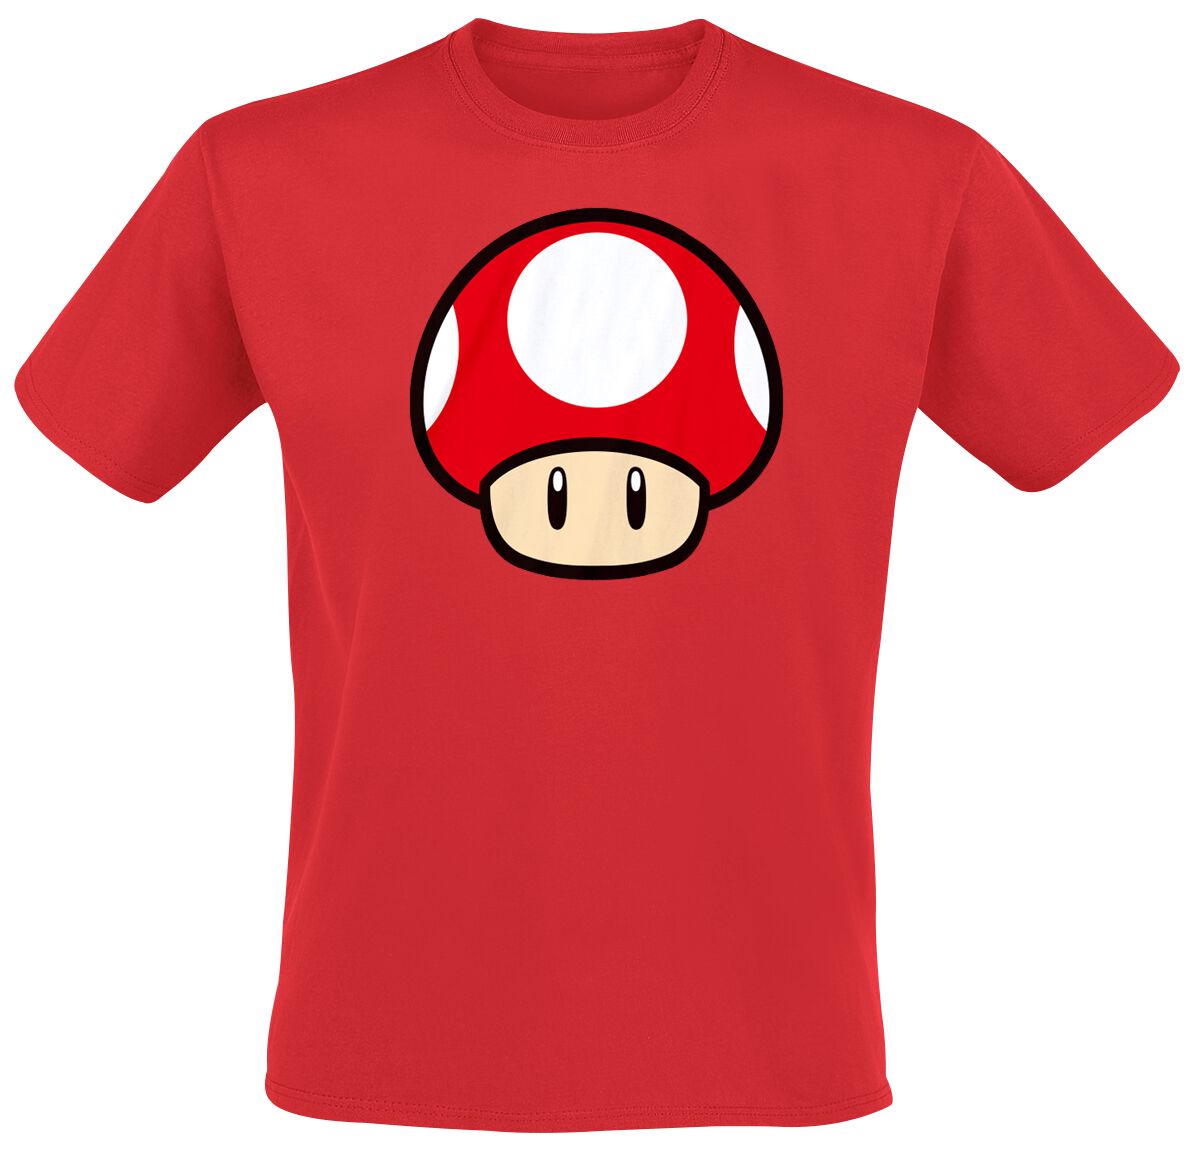 Super Mario Power Up T-Shirt red